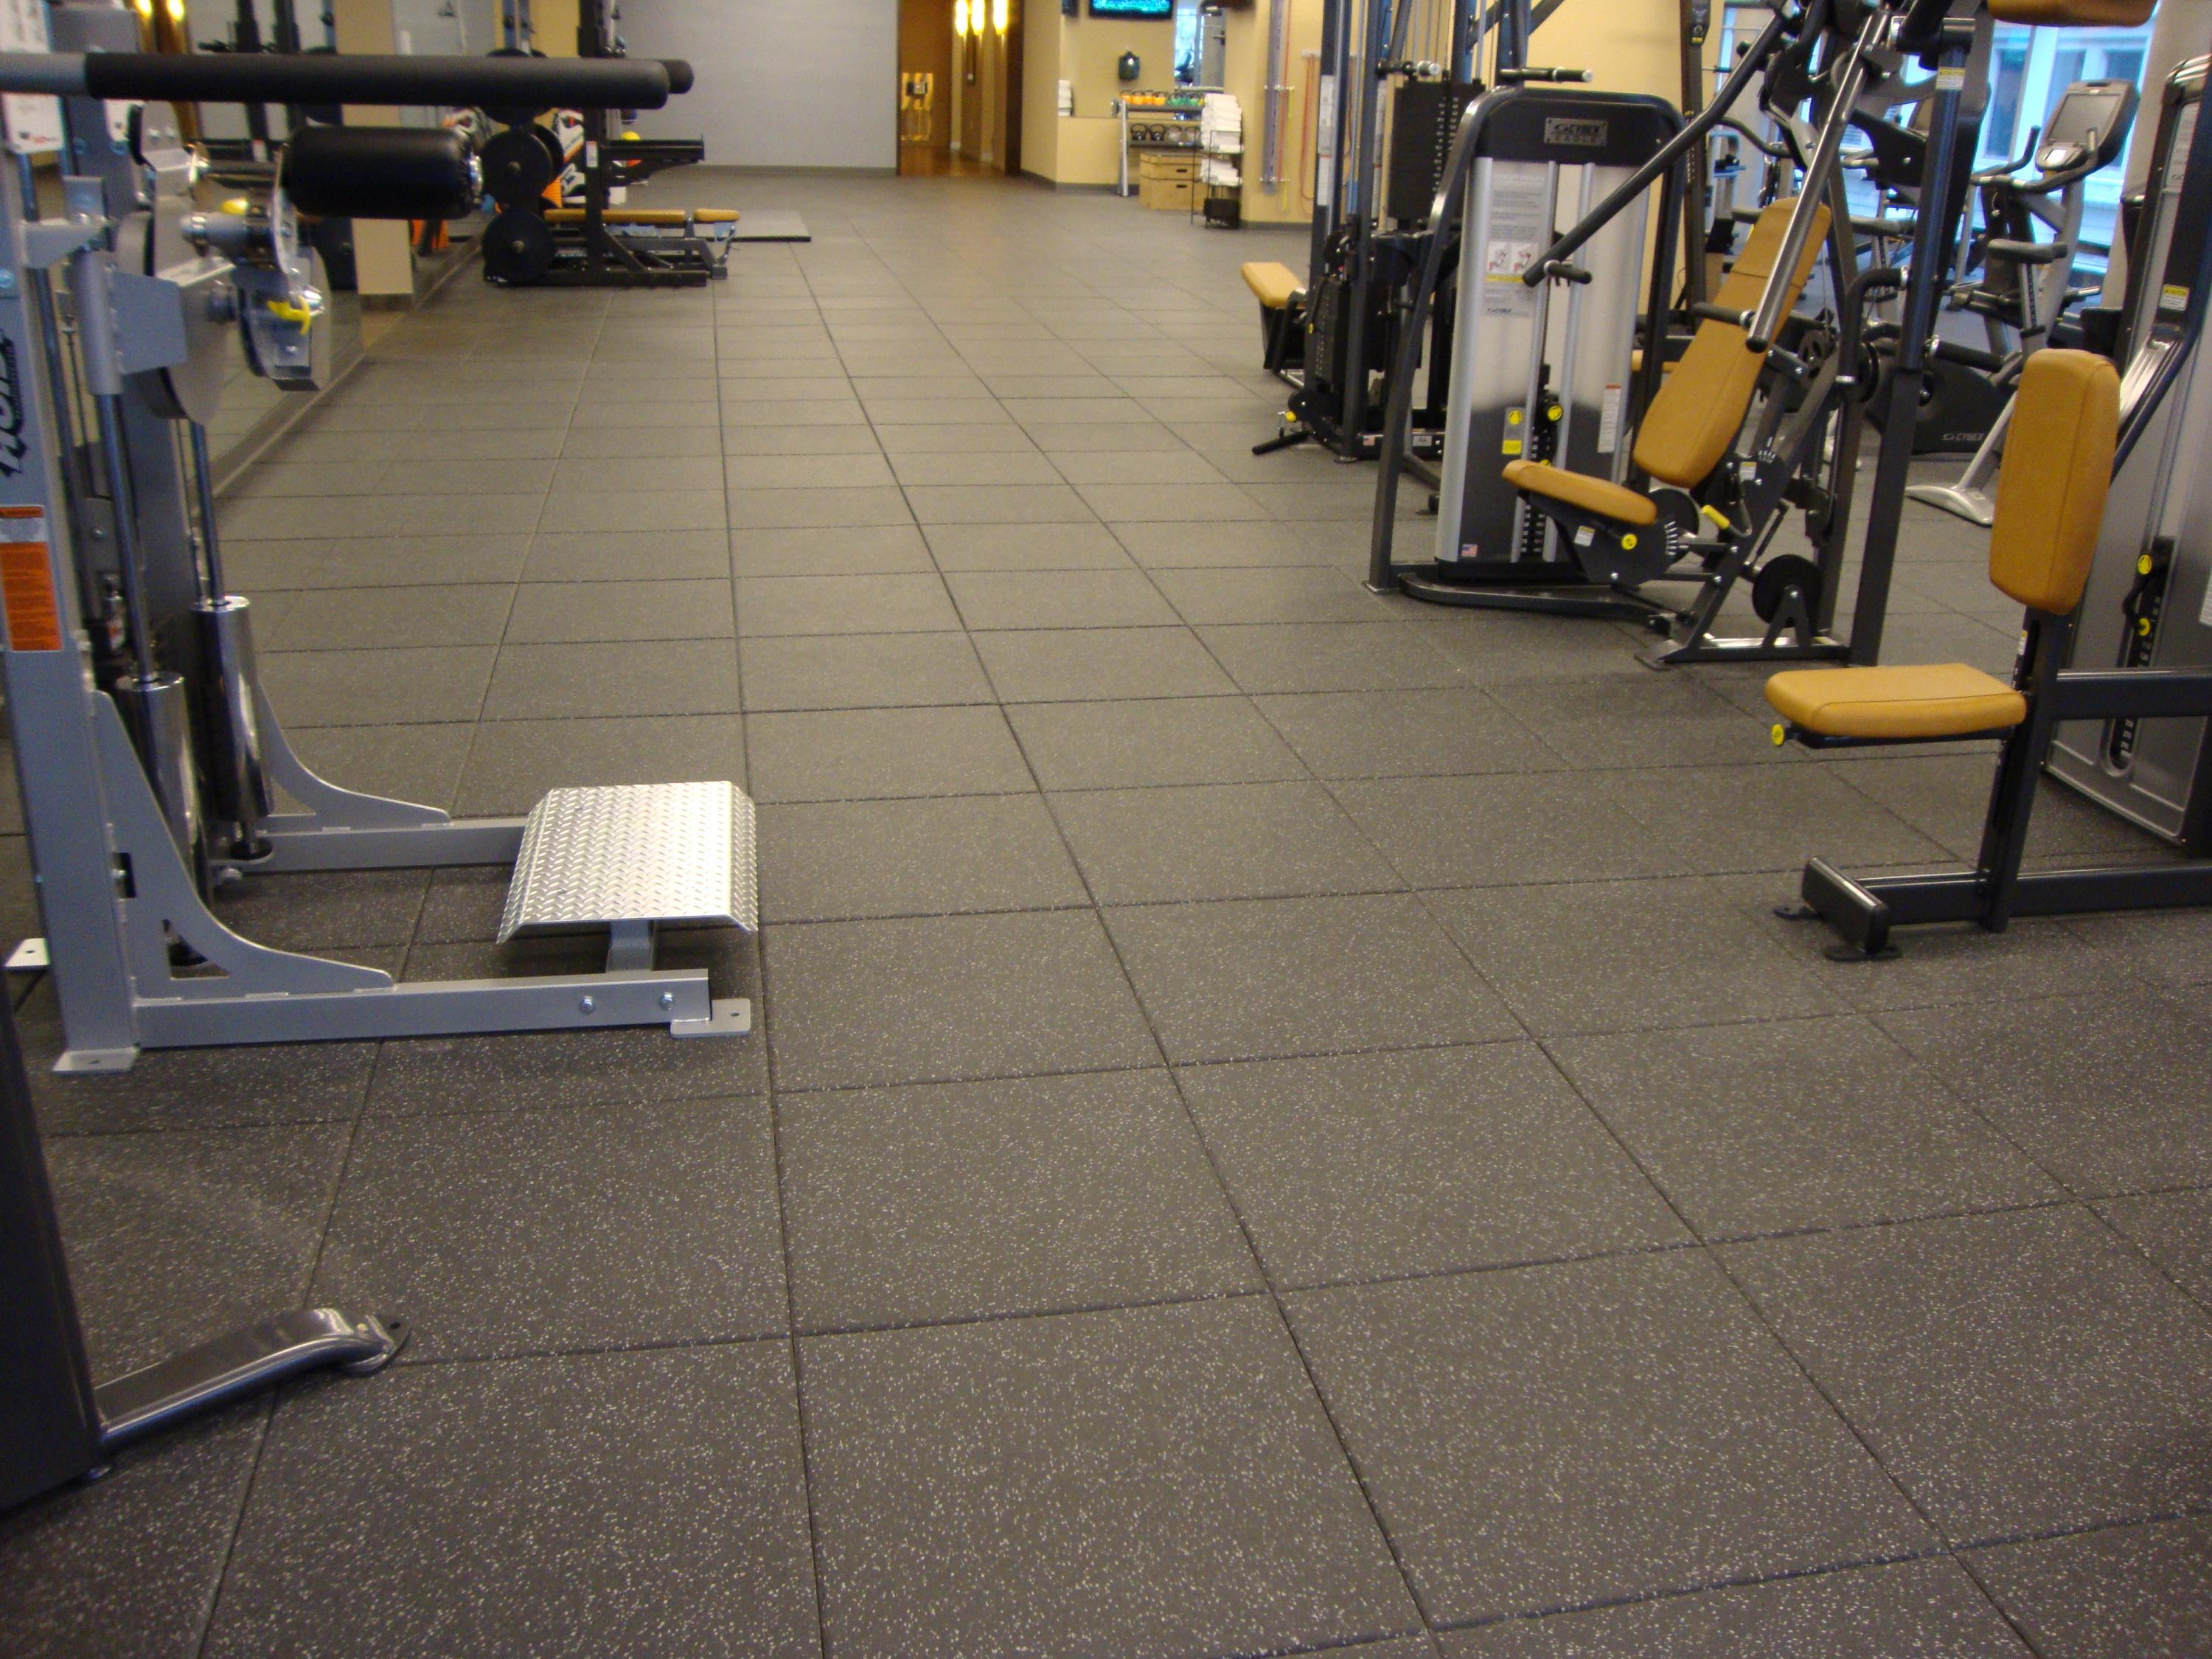 Physical Therapy Center using our self-interlocking rubber tiles